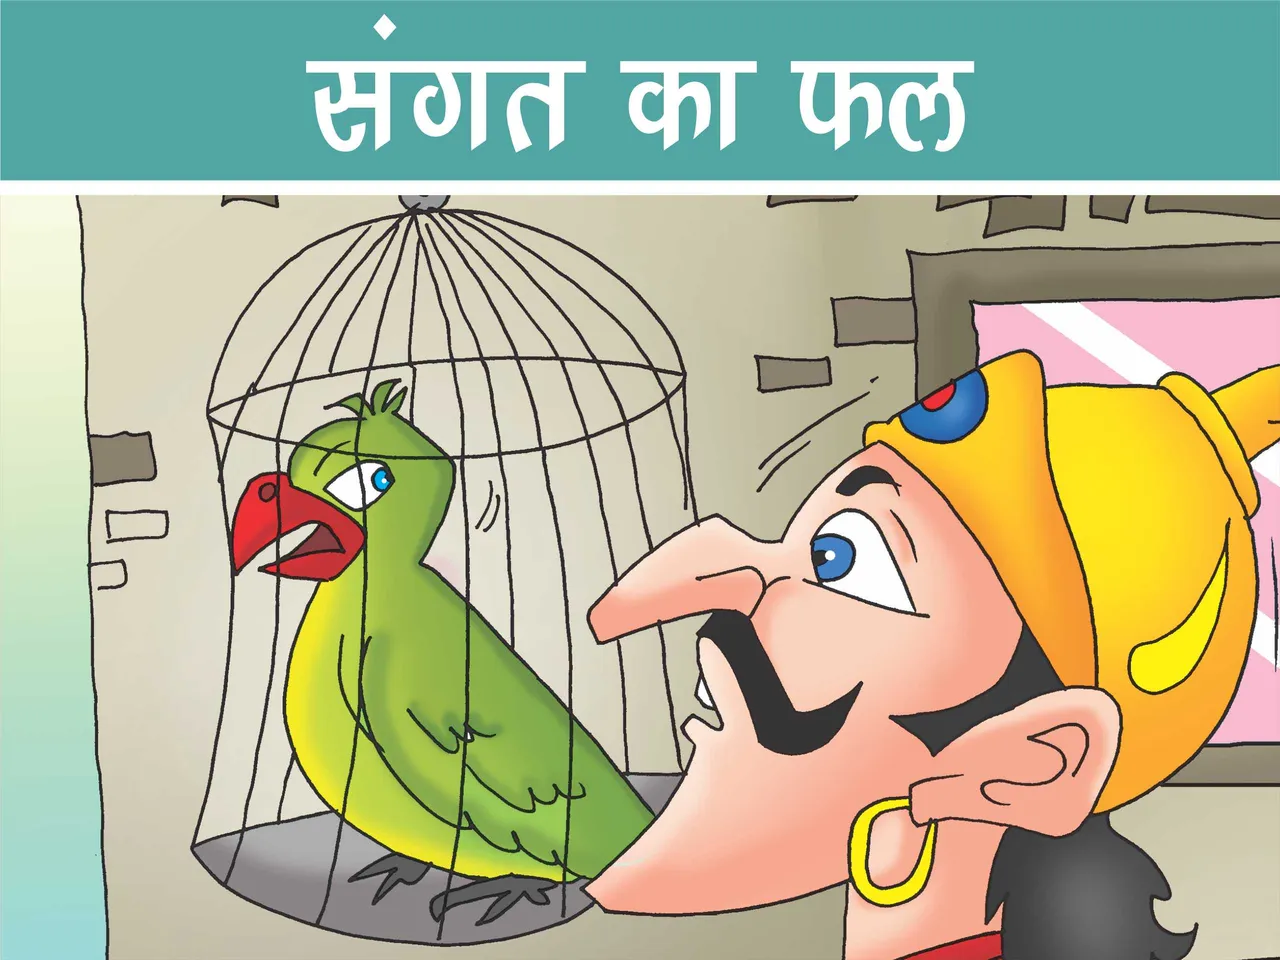 Cartoon image of King talking with parrot